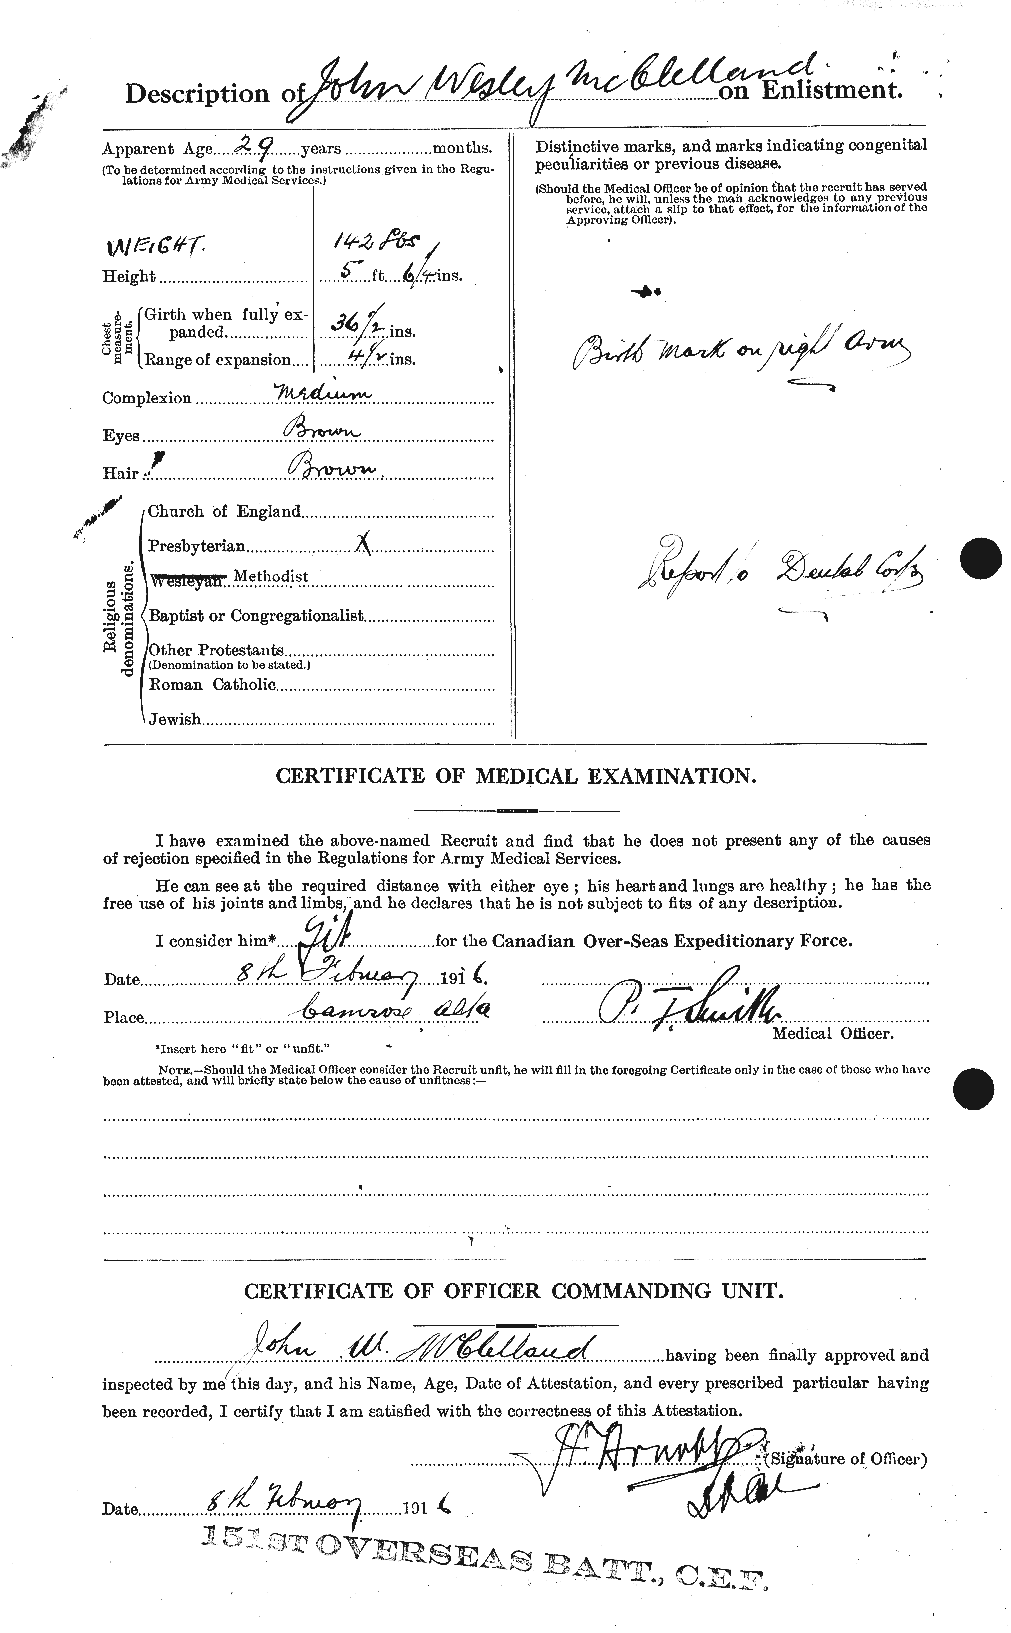 Personnel Records of the First World War - CEF 134776b